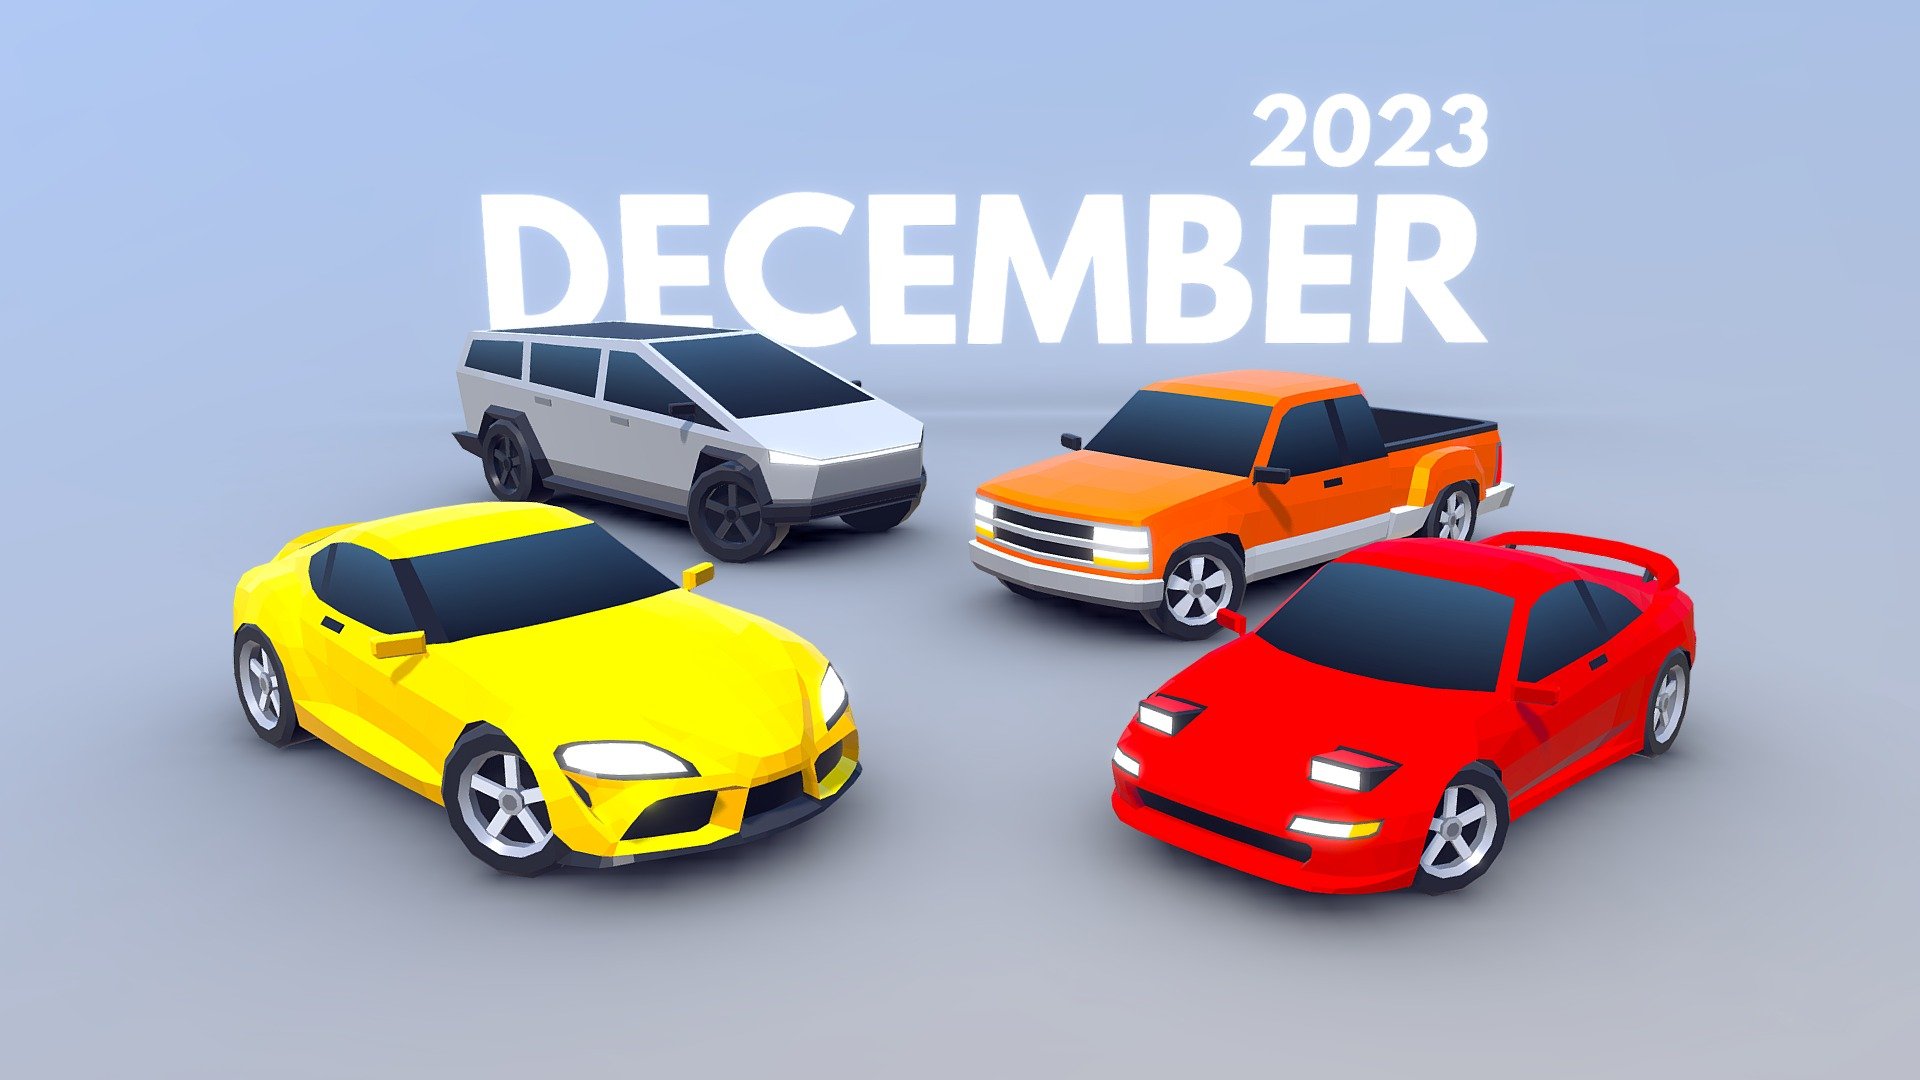 December 2023 update of Low Poly Cars - Mega Pack. This is available in the Unity Asset Store and Sketchfab (click here). Update will be available on December 8th 3d model